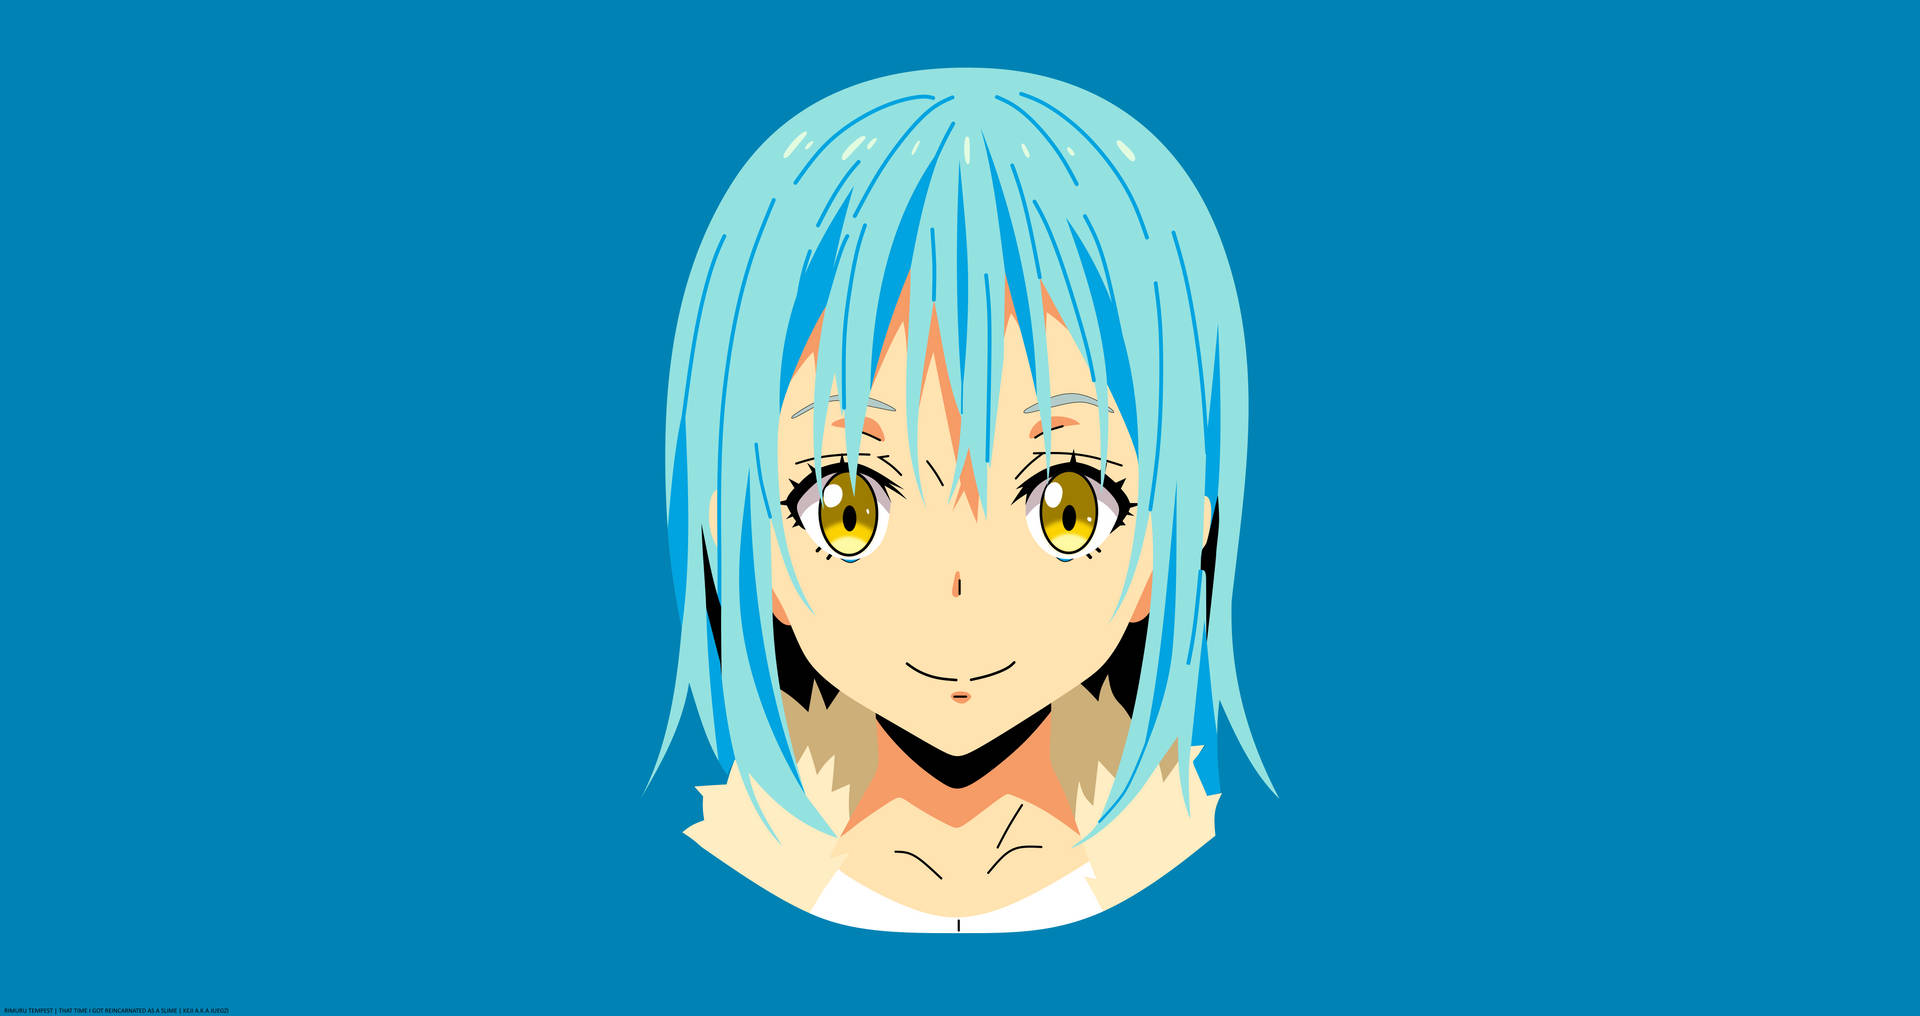 Invincible Rimuru Tempest - Anime Hero From That Time I Got Reincarnated As A Slime Background